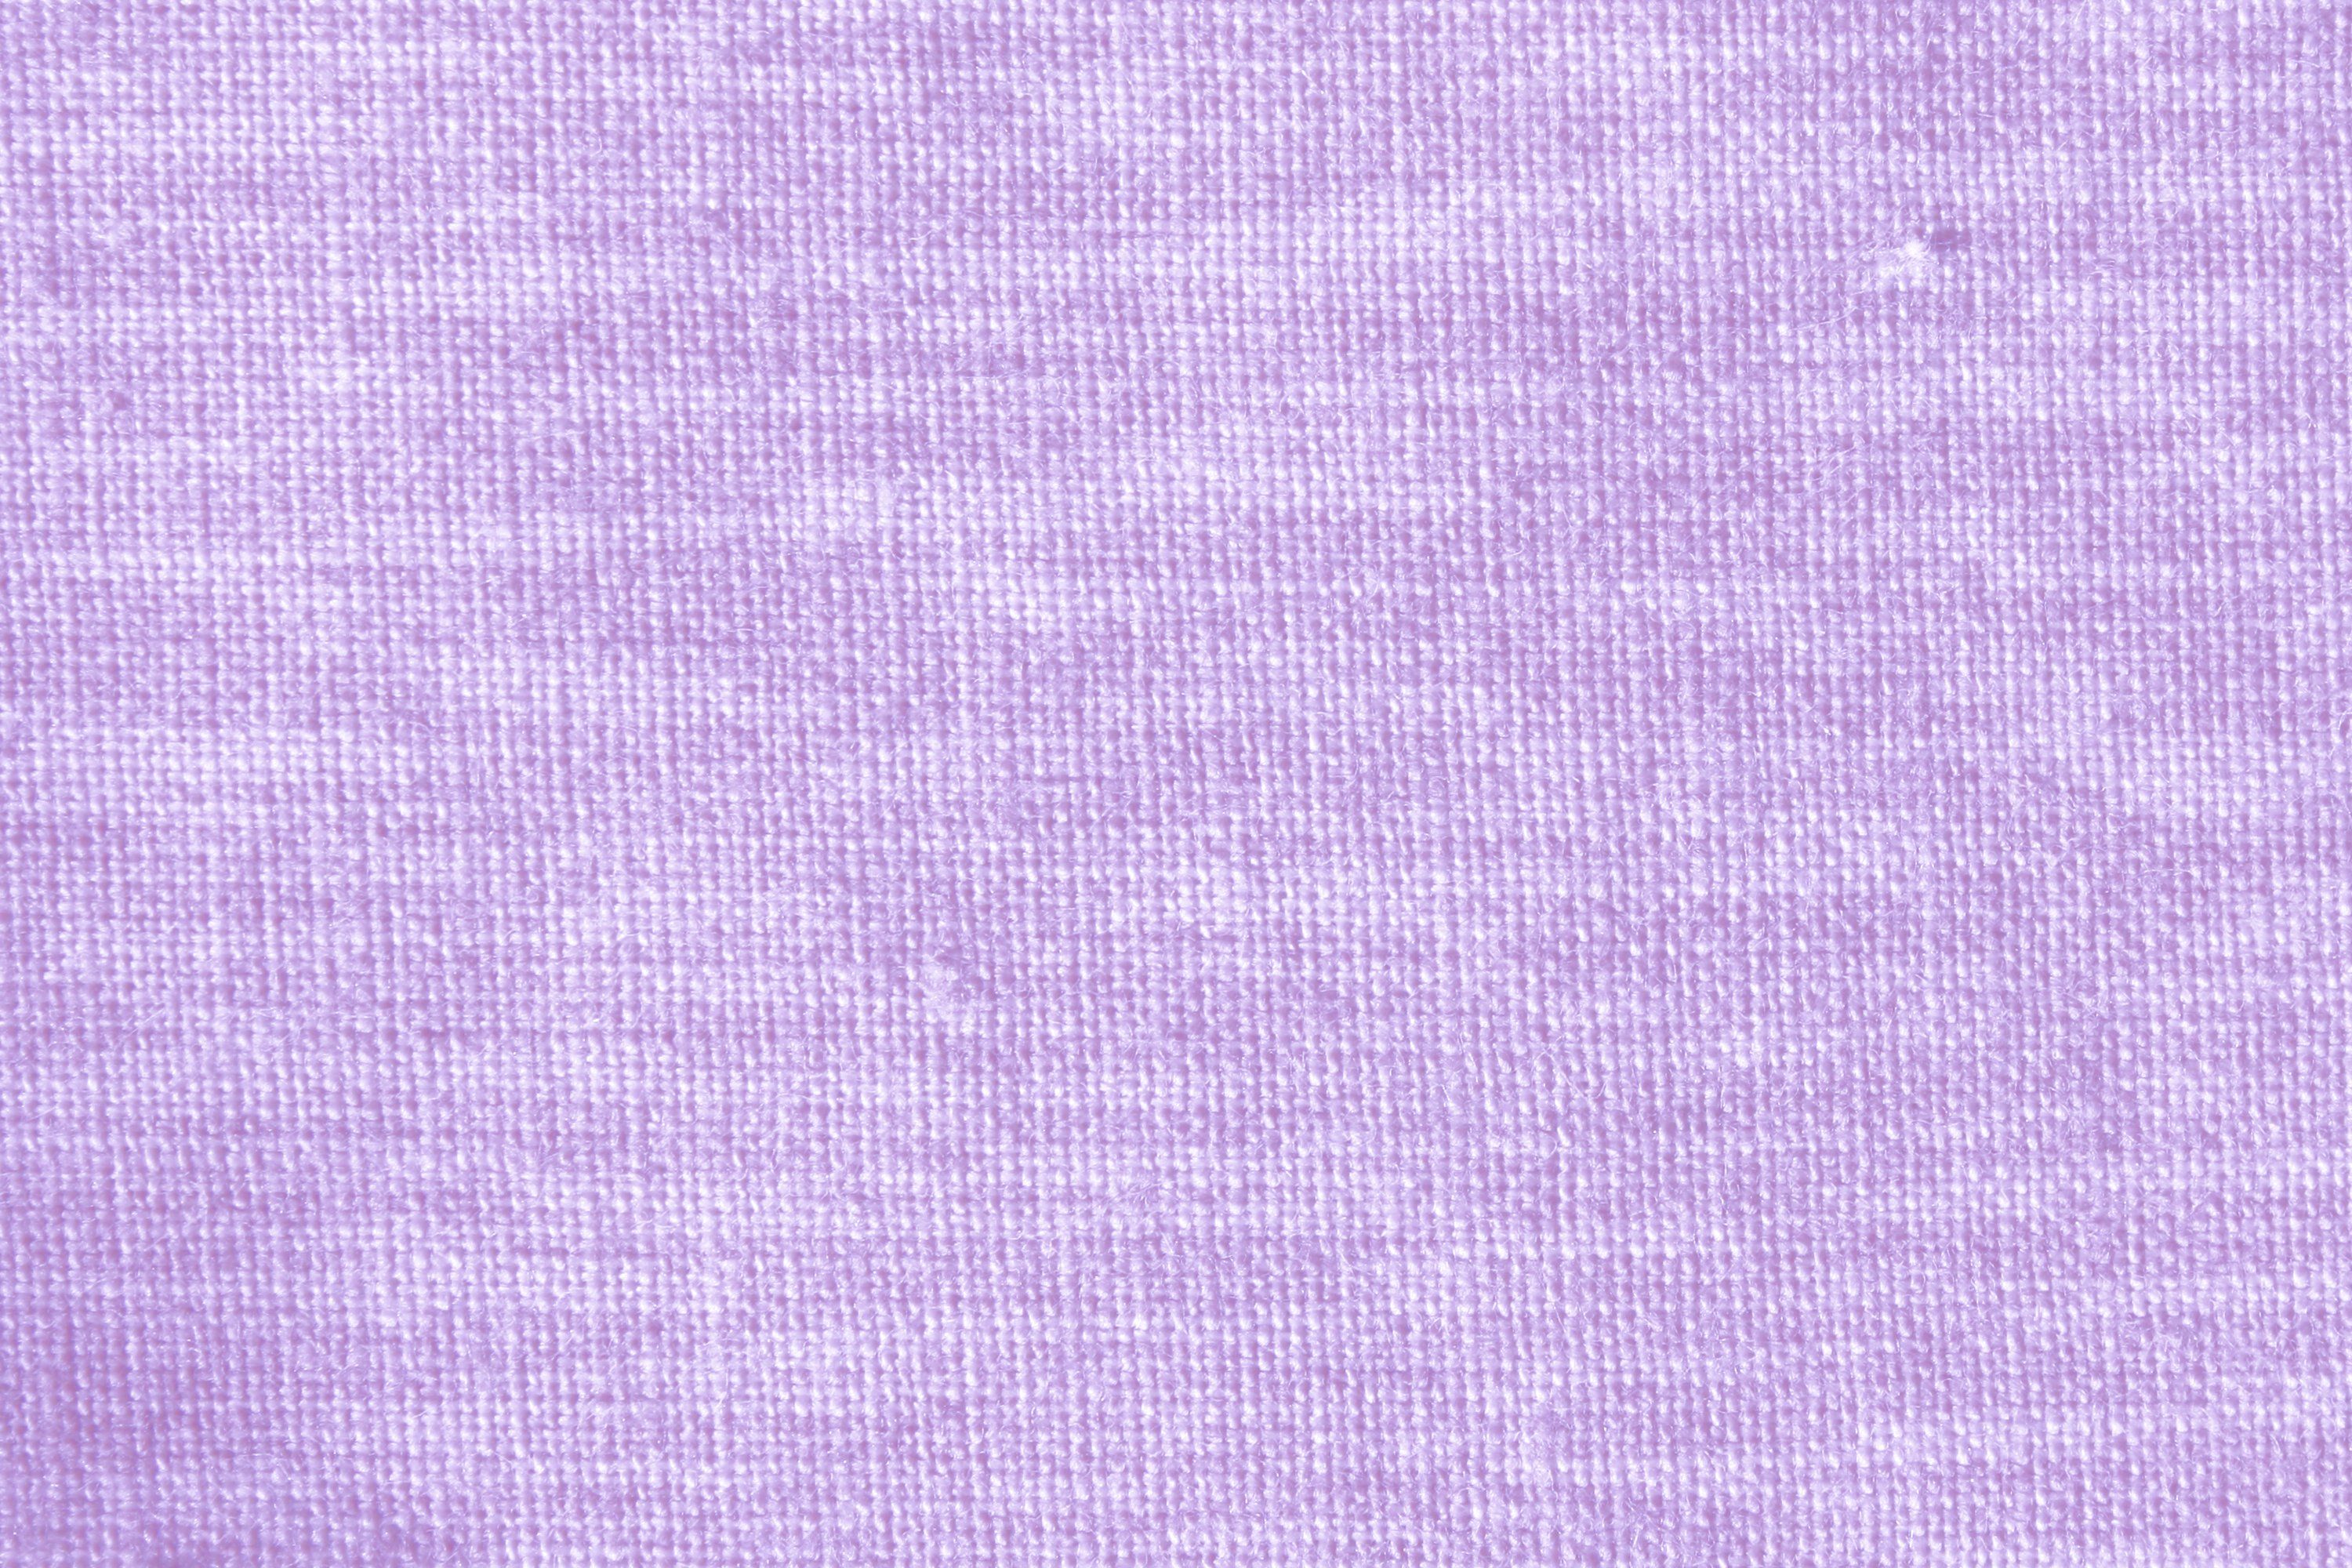 muted purple color fabric. Lavender or Light Purple Woven Fabric